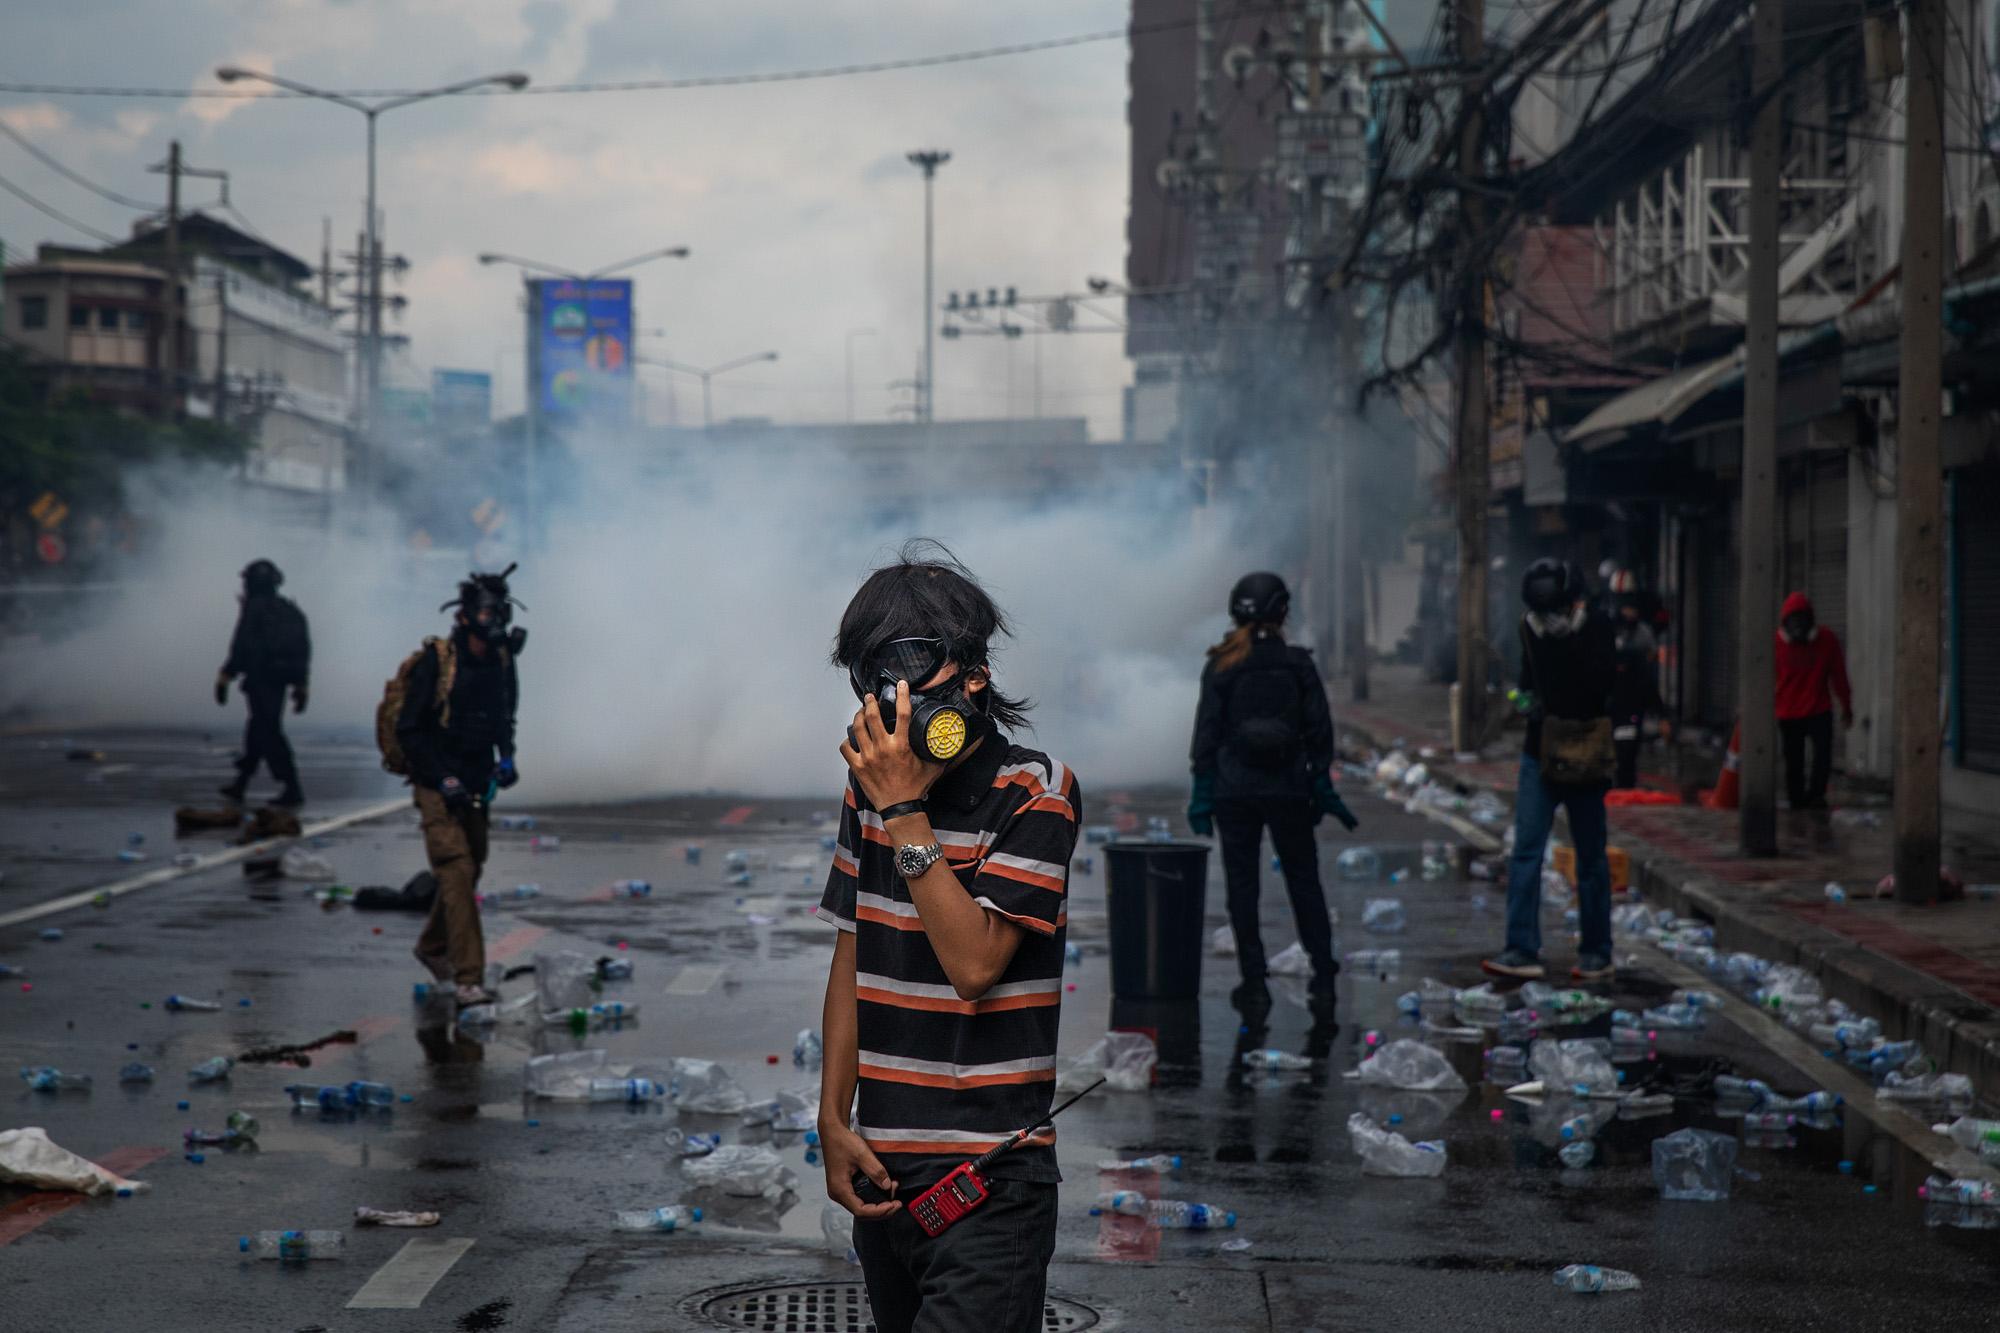 Pro-democracy protestors react to tear gas from riot police during a rally near Din Daeng intersection in Bangkok, Thailand, August 2021. This day marked the beginning of an escalation in violent protests that continued through the rest of the year, primarily located around the Din Daeng area. 